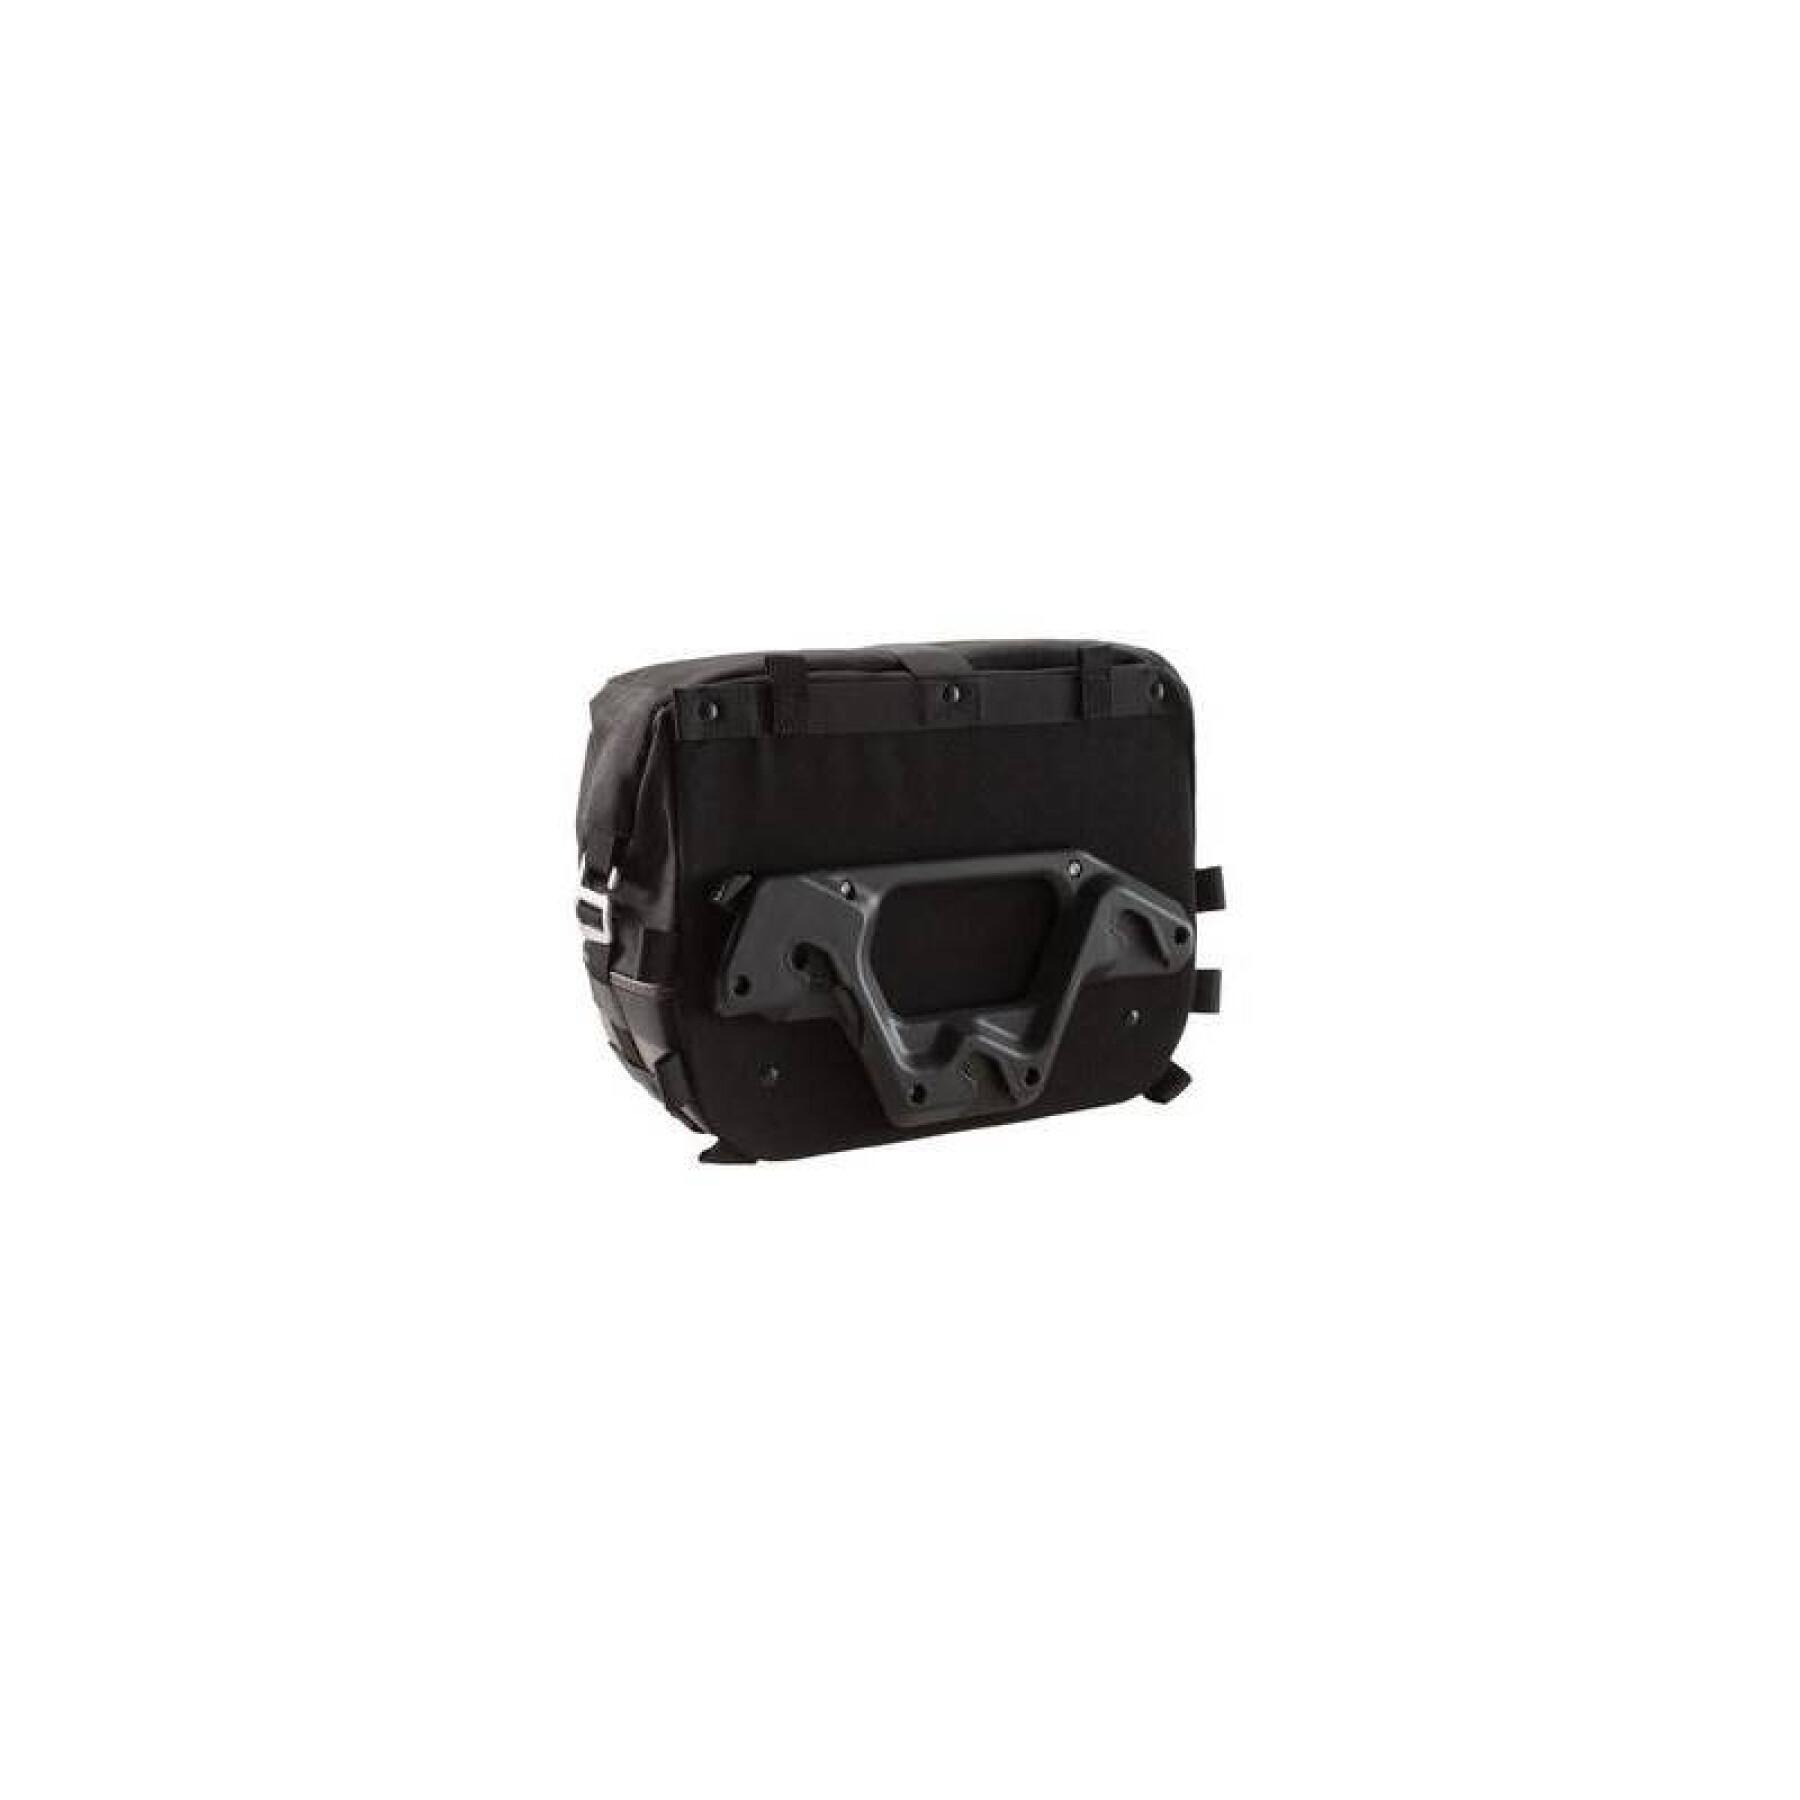 Side bag to attach to right side slc support SW-Motech Legend Gear LC1